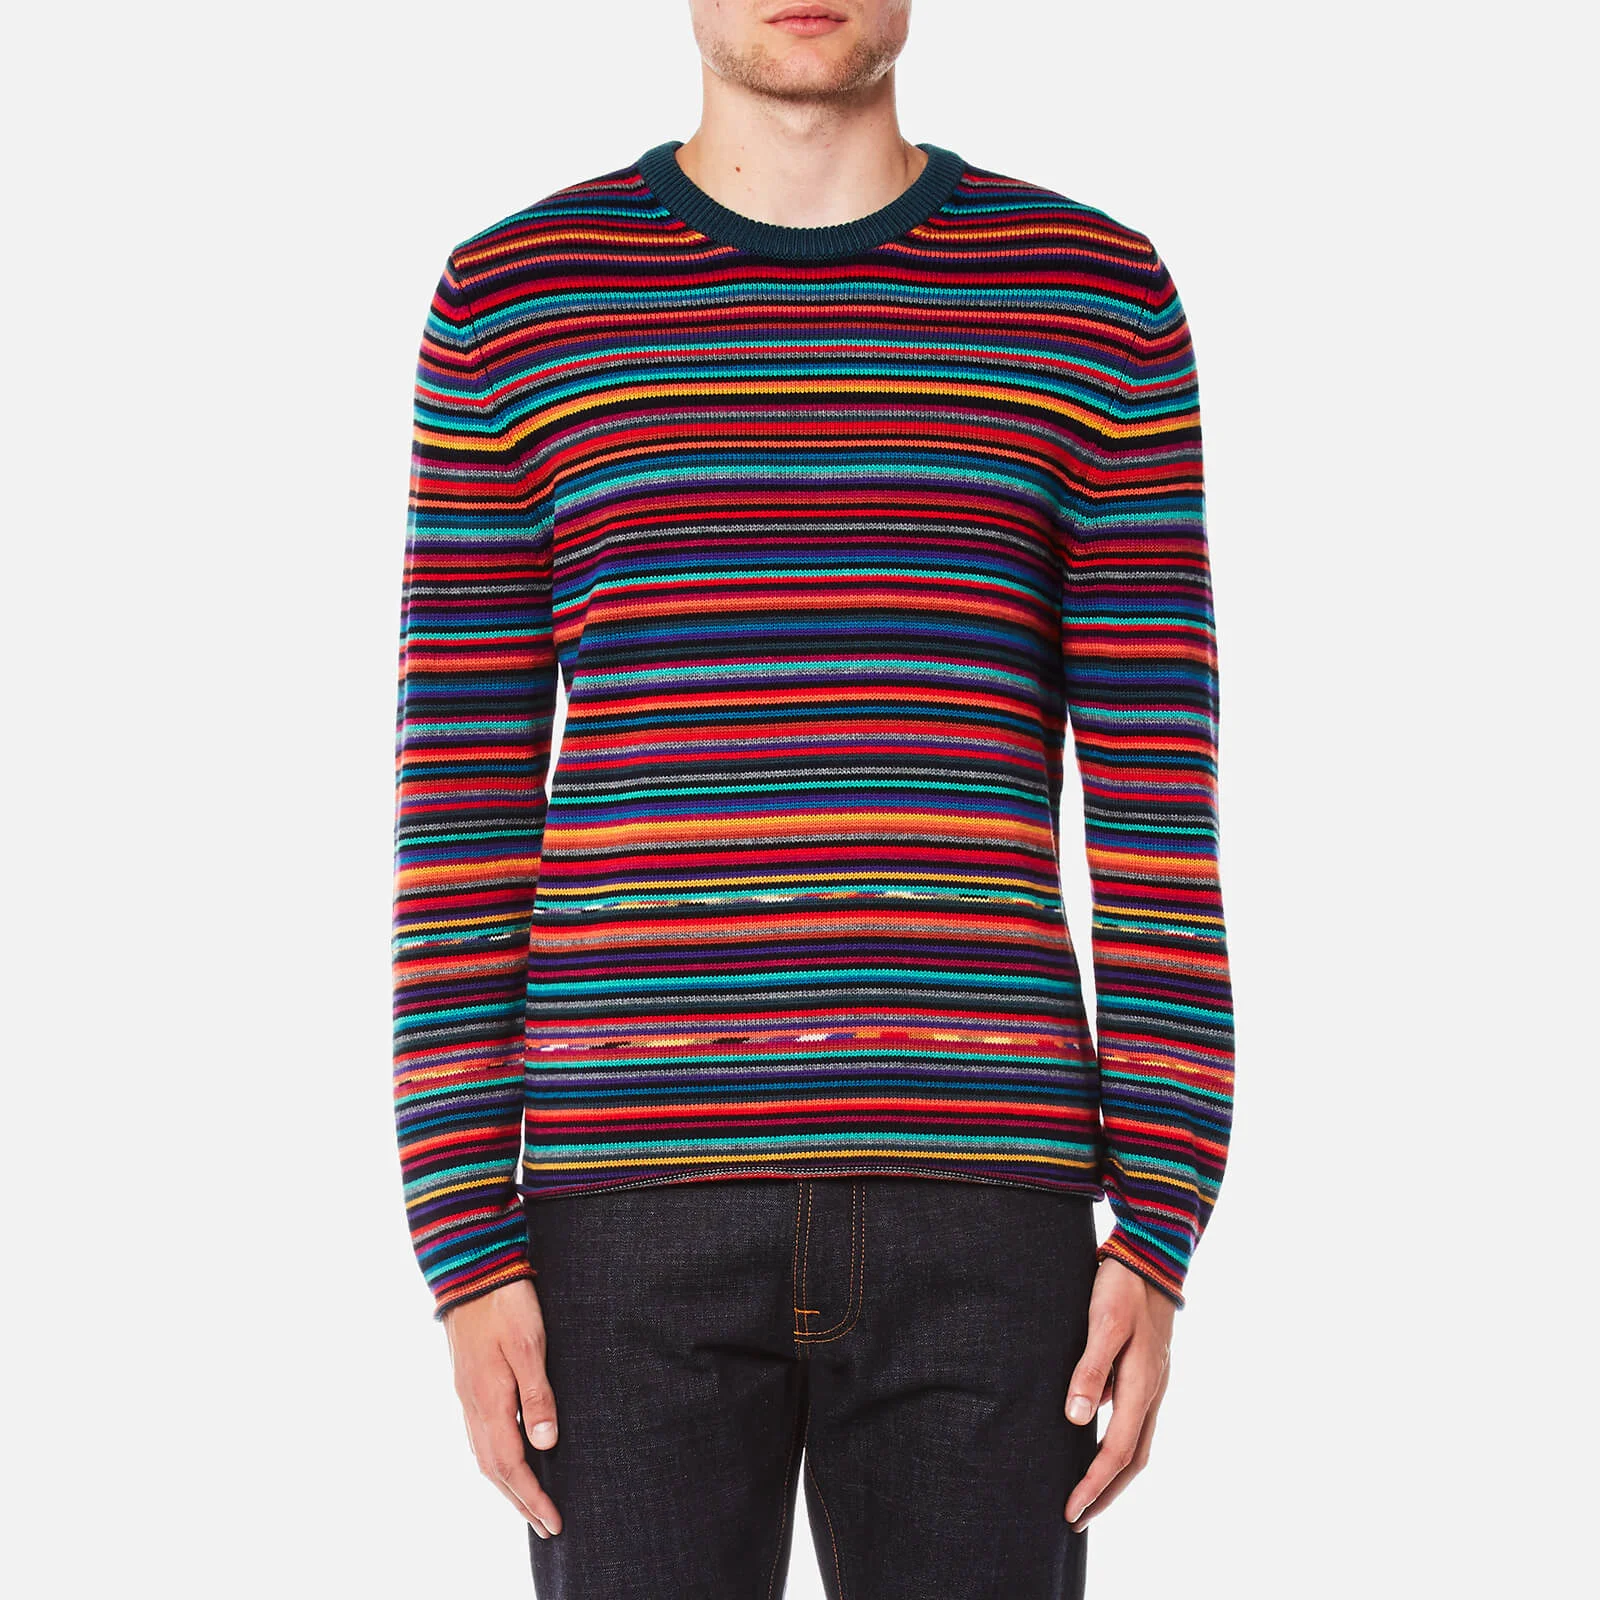 PS by Paul Smith Men's All Over Stripe Knitted Jumper - Multi Image 1